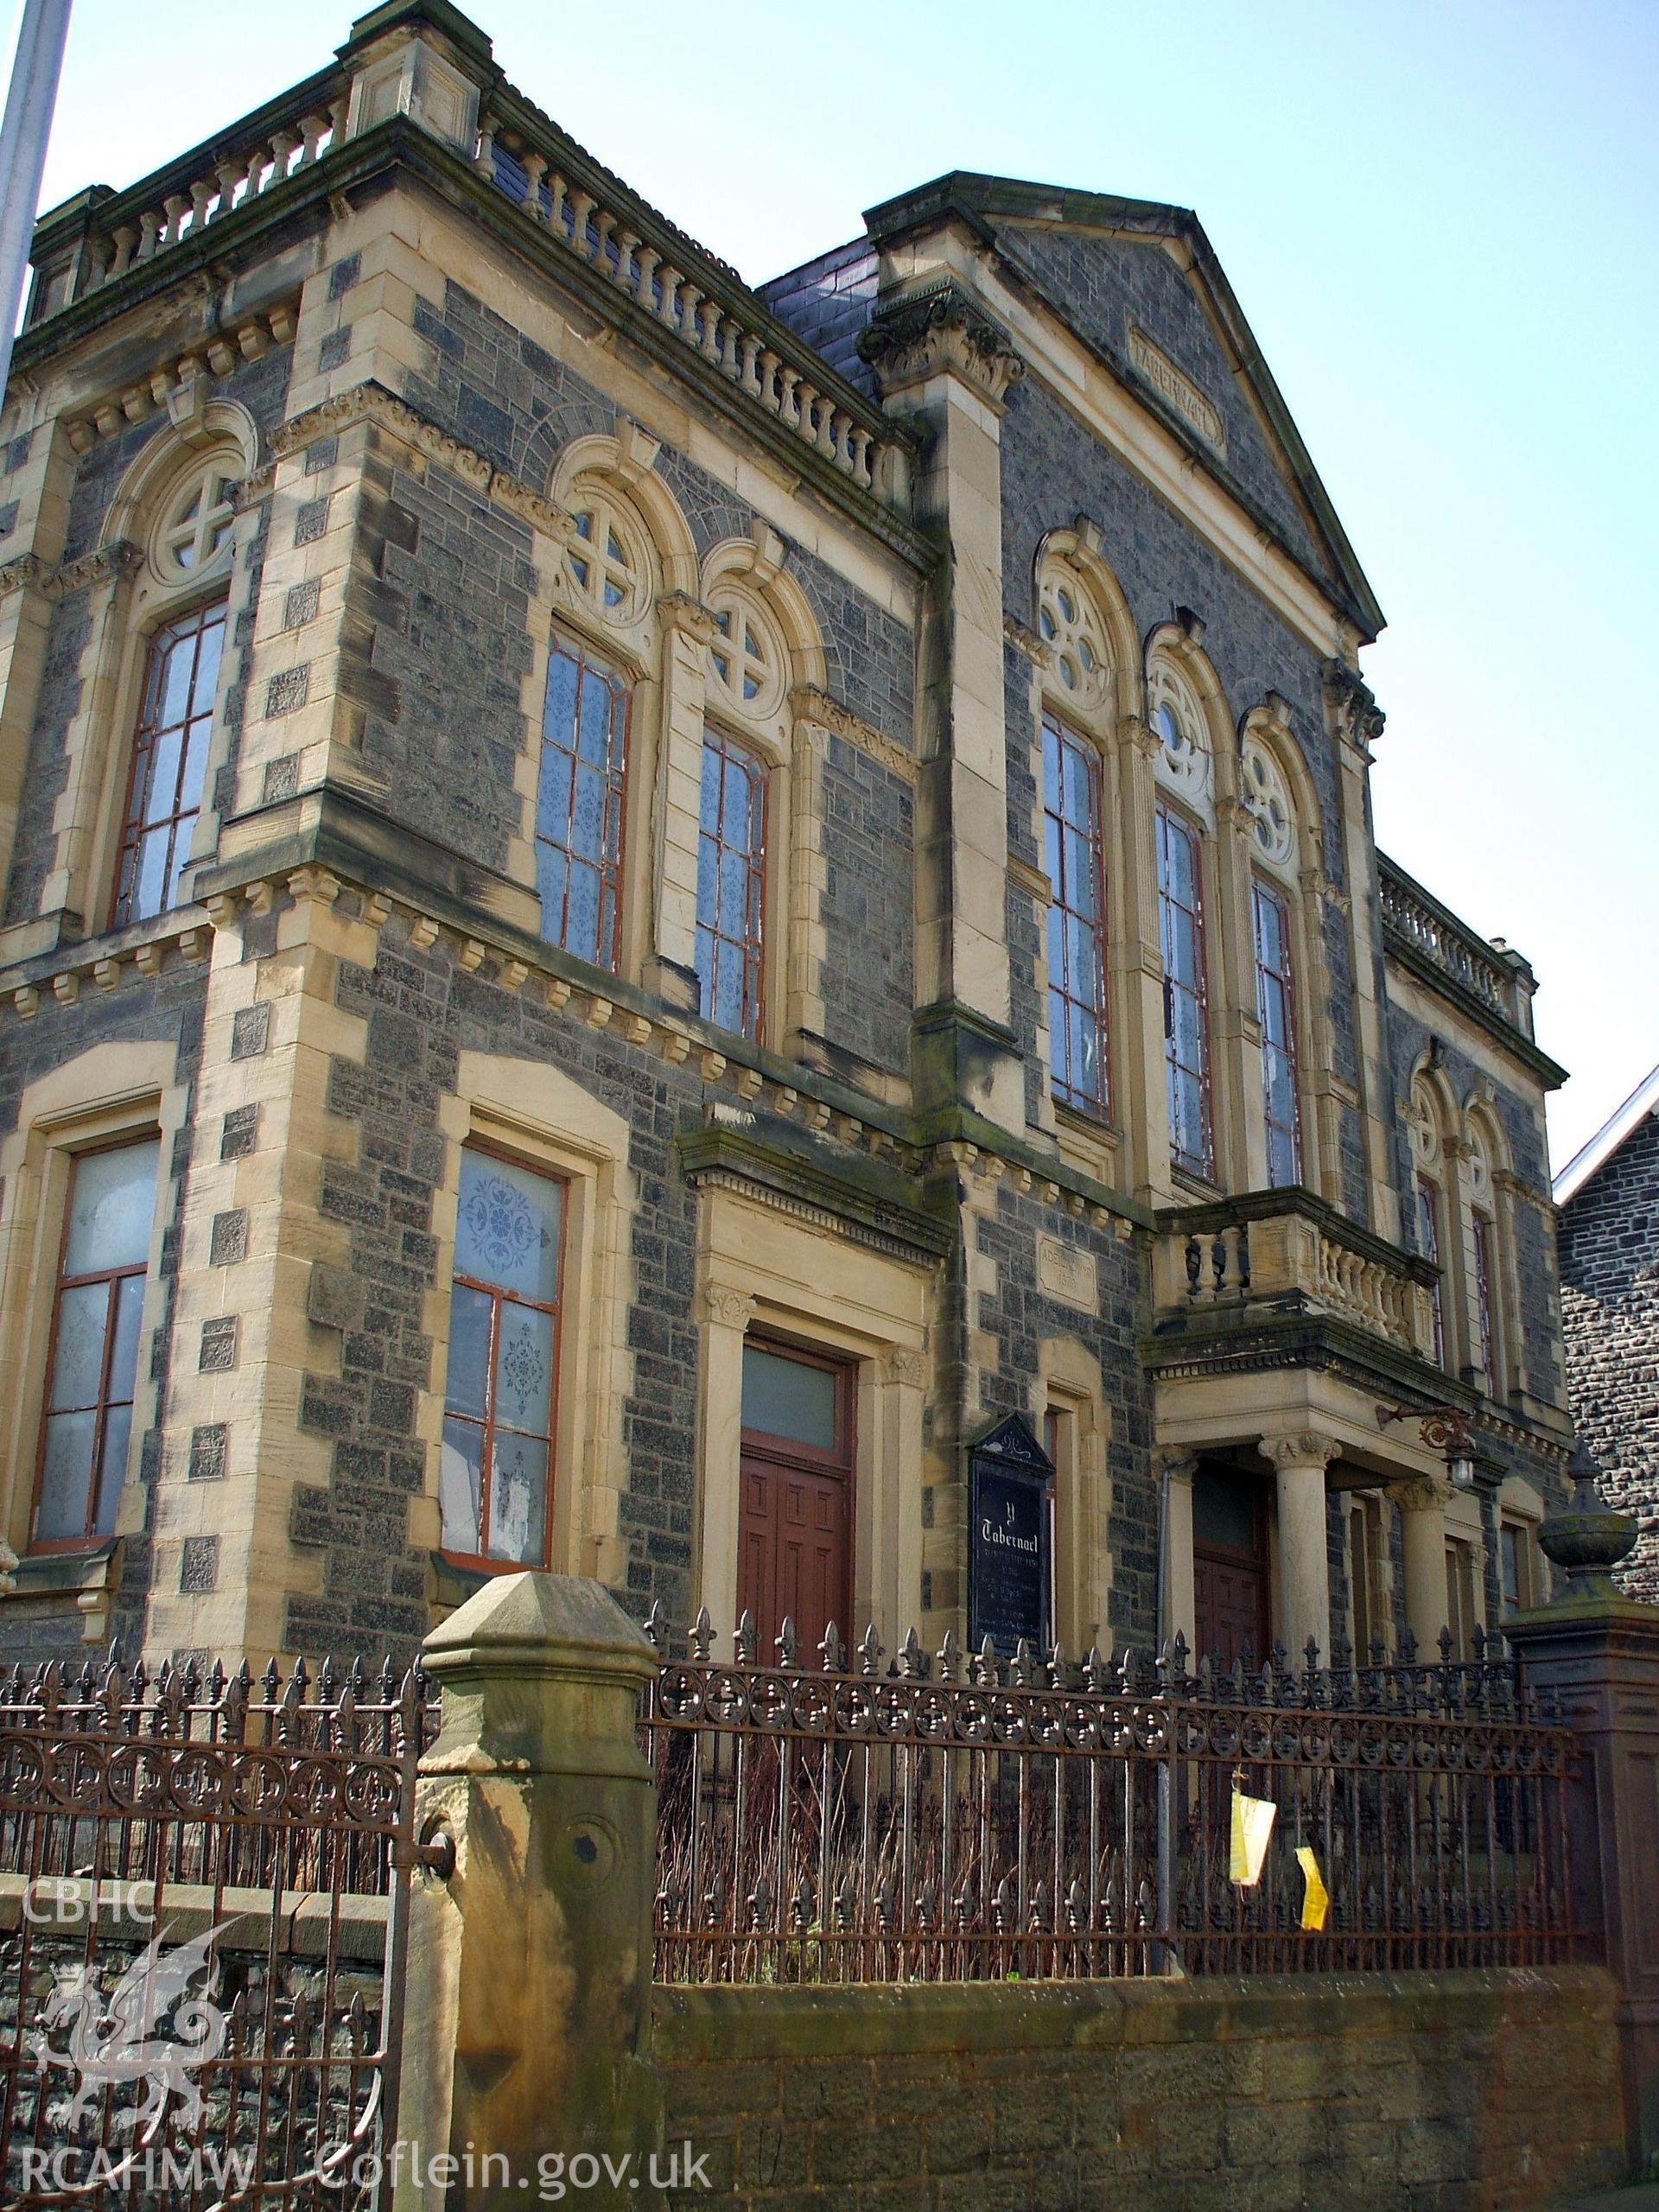 Colour digital photograph showing the front exterior of Tabernacle Chapel, Aberystwyth.